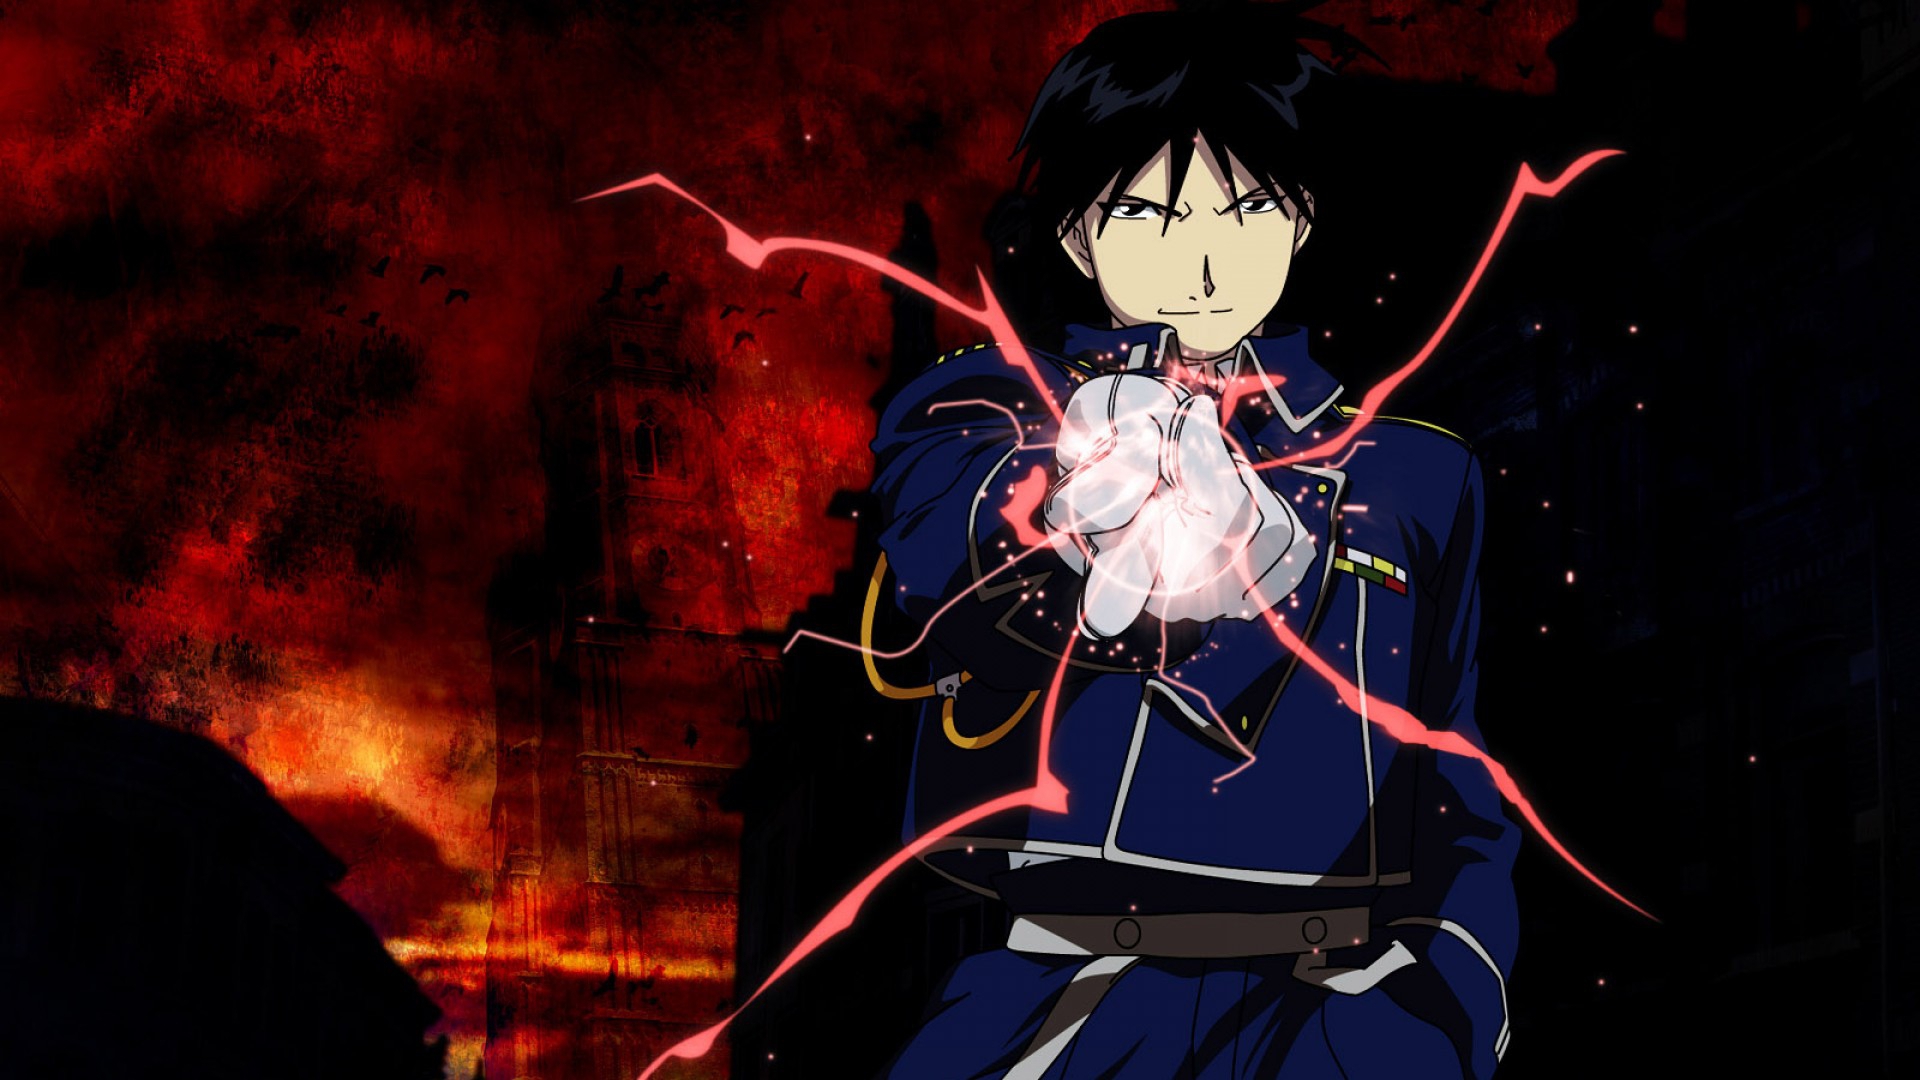 Roy Mustang Wallpaper Image Photos Pictures Background